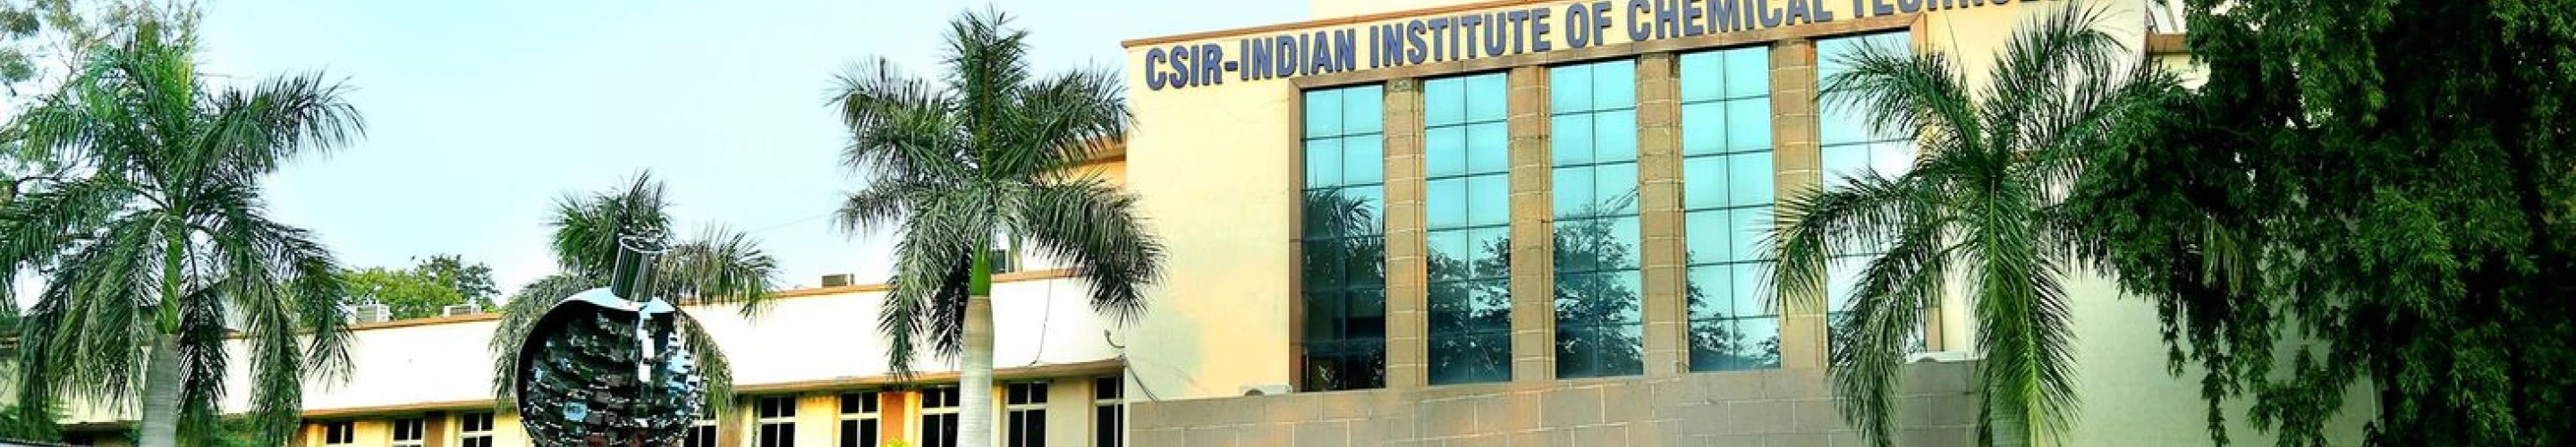 CSIR-INDIAN INSTITUTE OF CHEMICAL TECHNOLOGY, CSIR-IICT